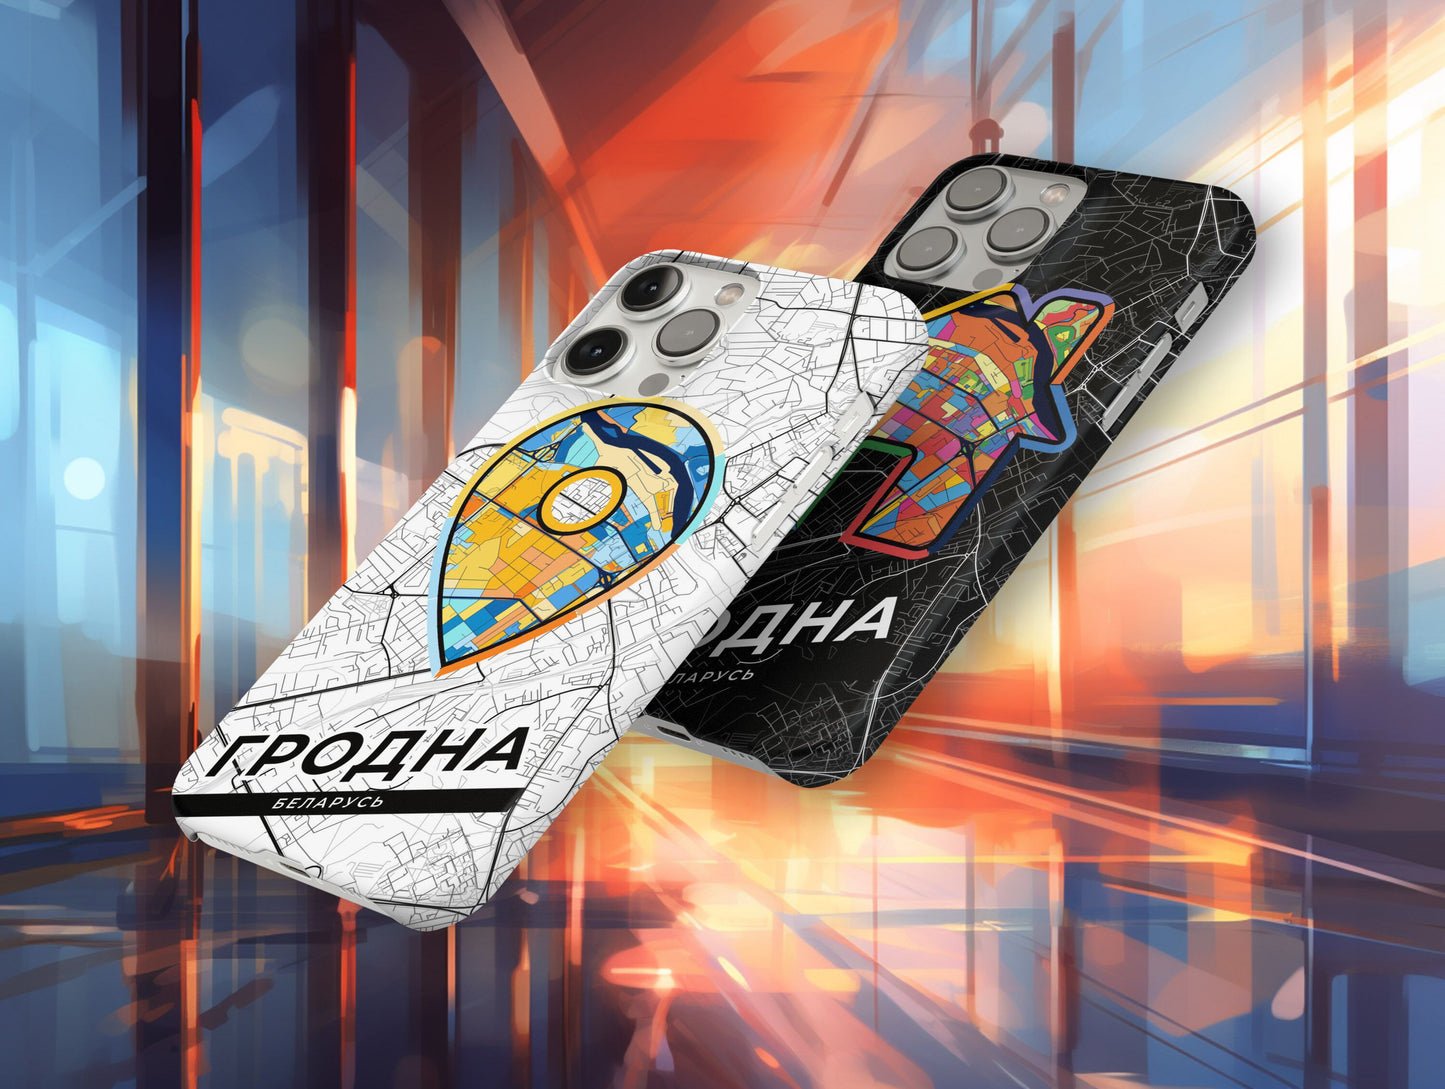 Гродна Беларусь slim phone case with colorful icon. Birthday, wedding or housewarming gift. Couple match cases.